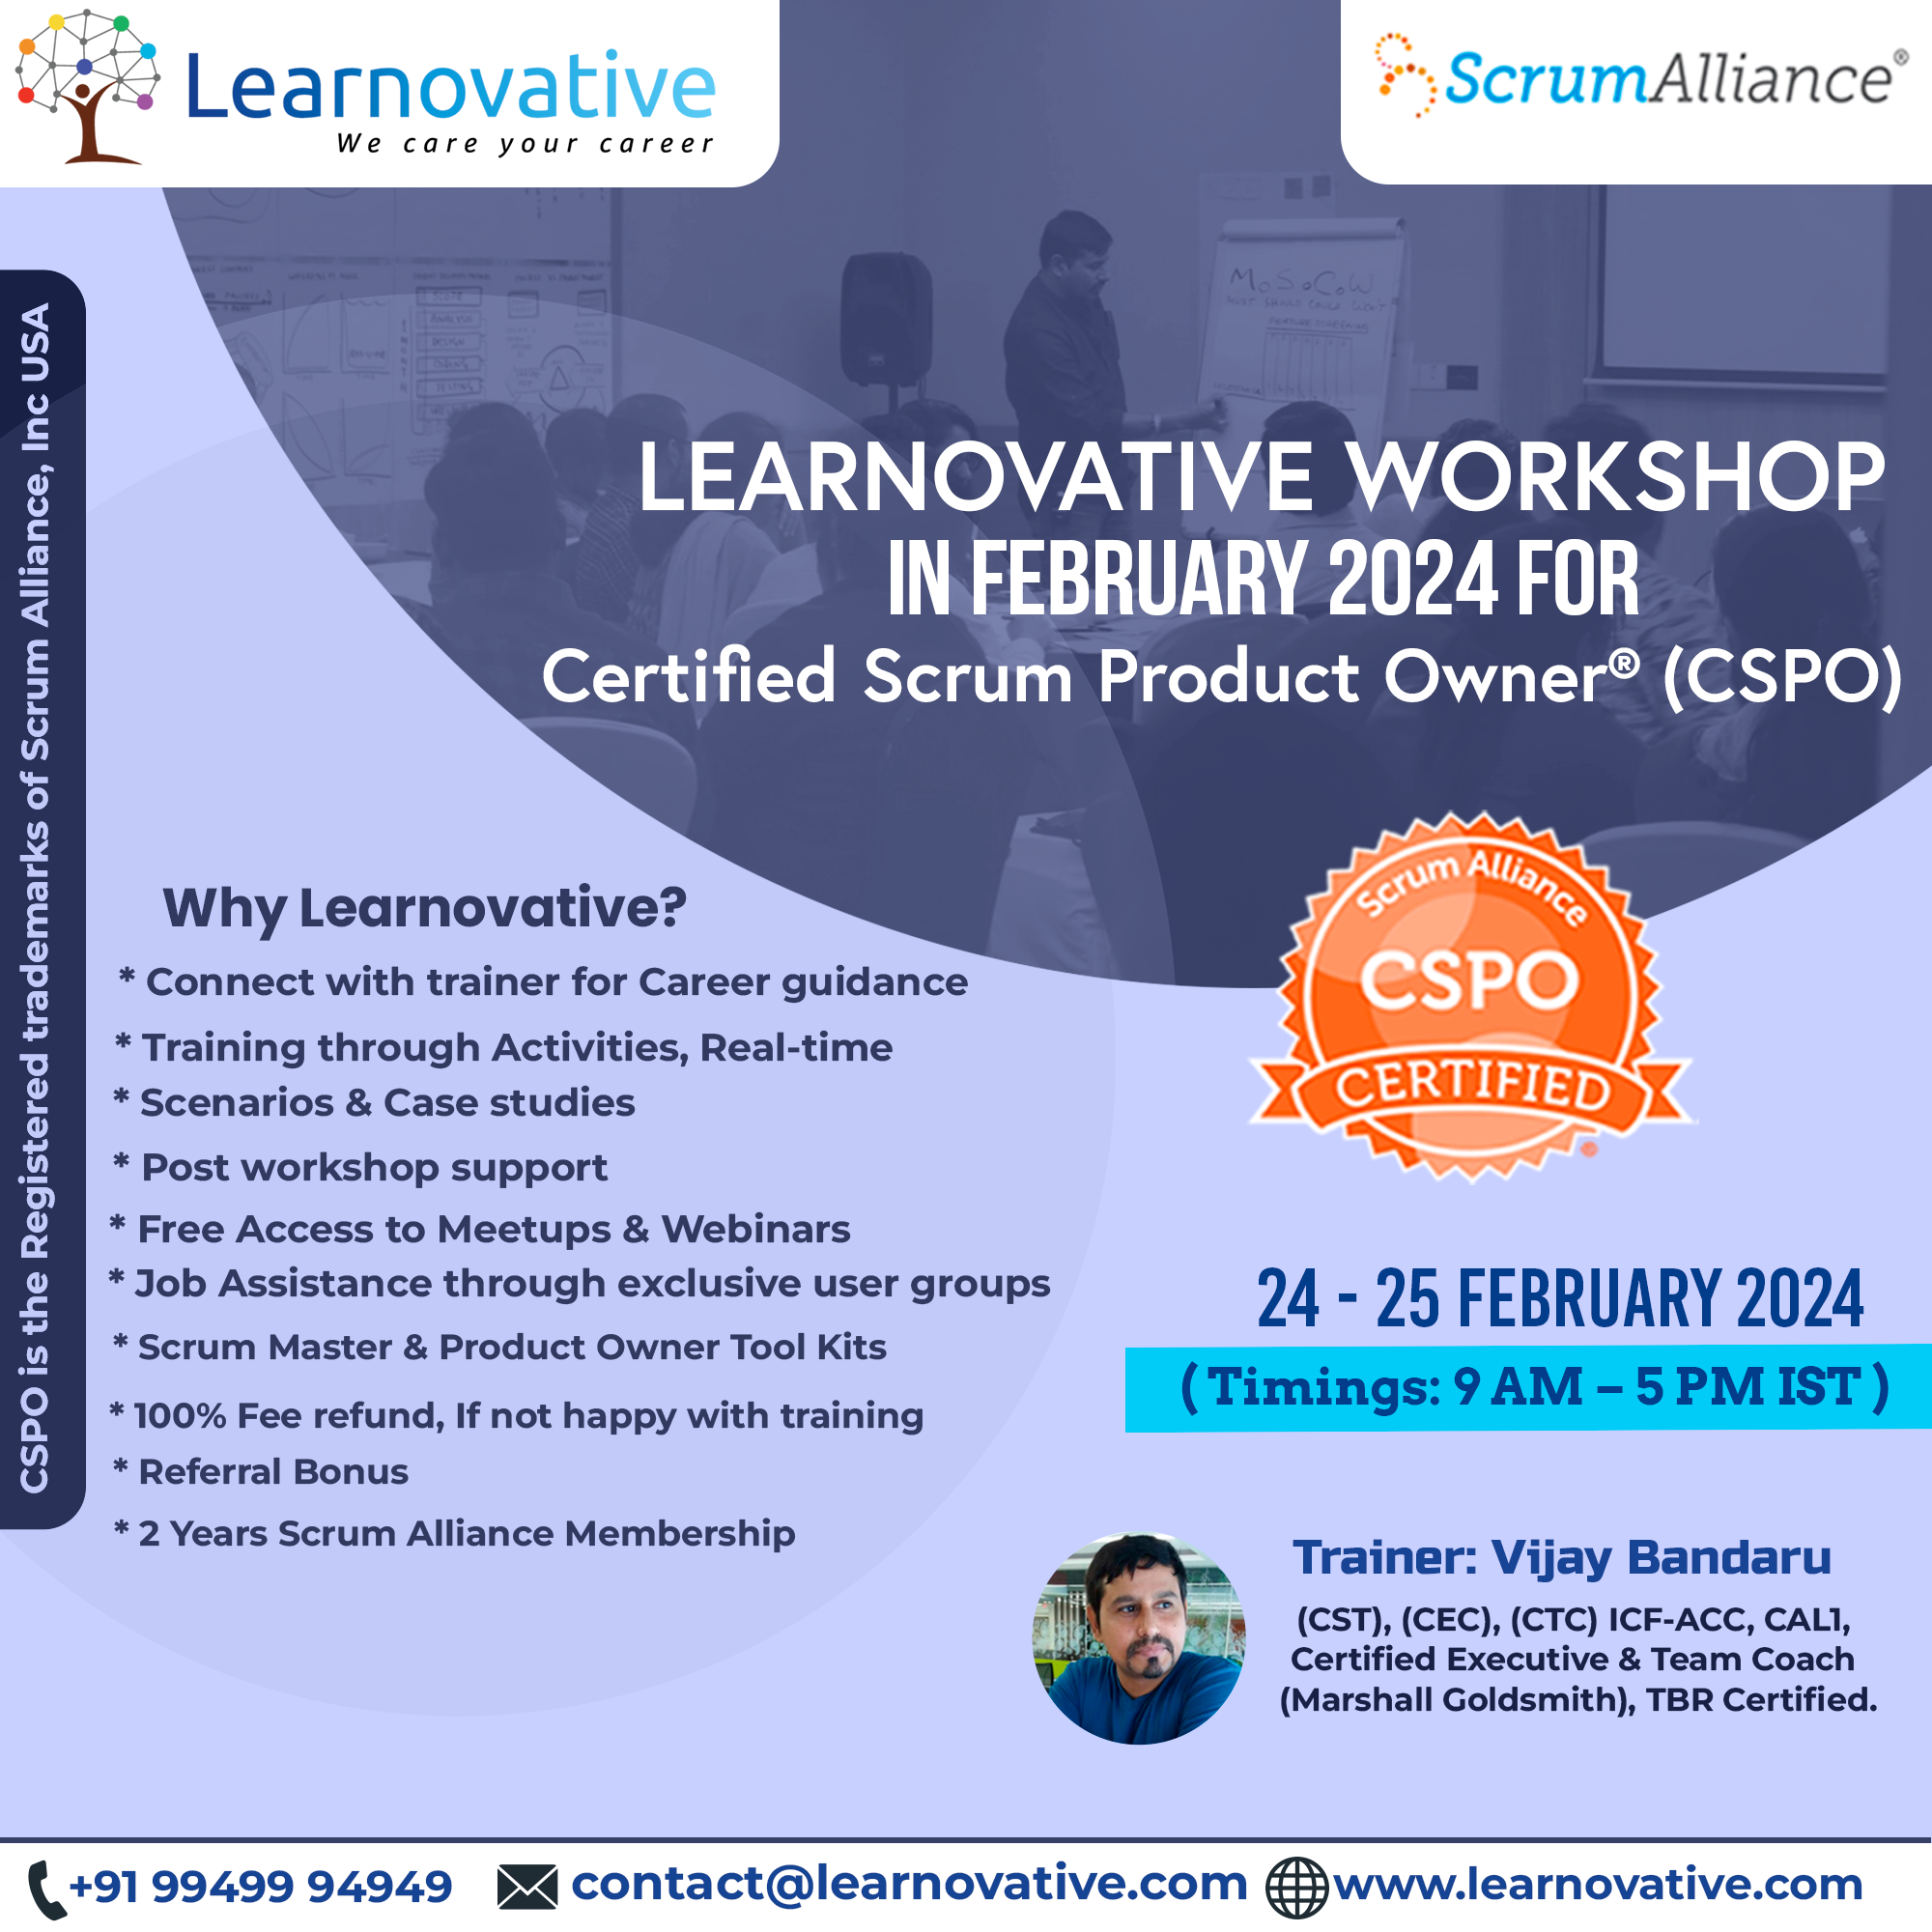 Certified Scrum Product Owner (CSPO) Online Training on 24 - 25 february 2024 | CSPO Training | CSPO Course | CSPO Training In Hyderabad | Learnovative, Online Event